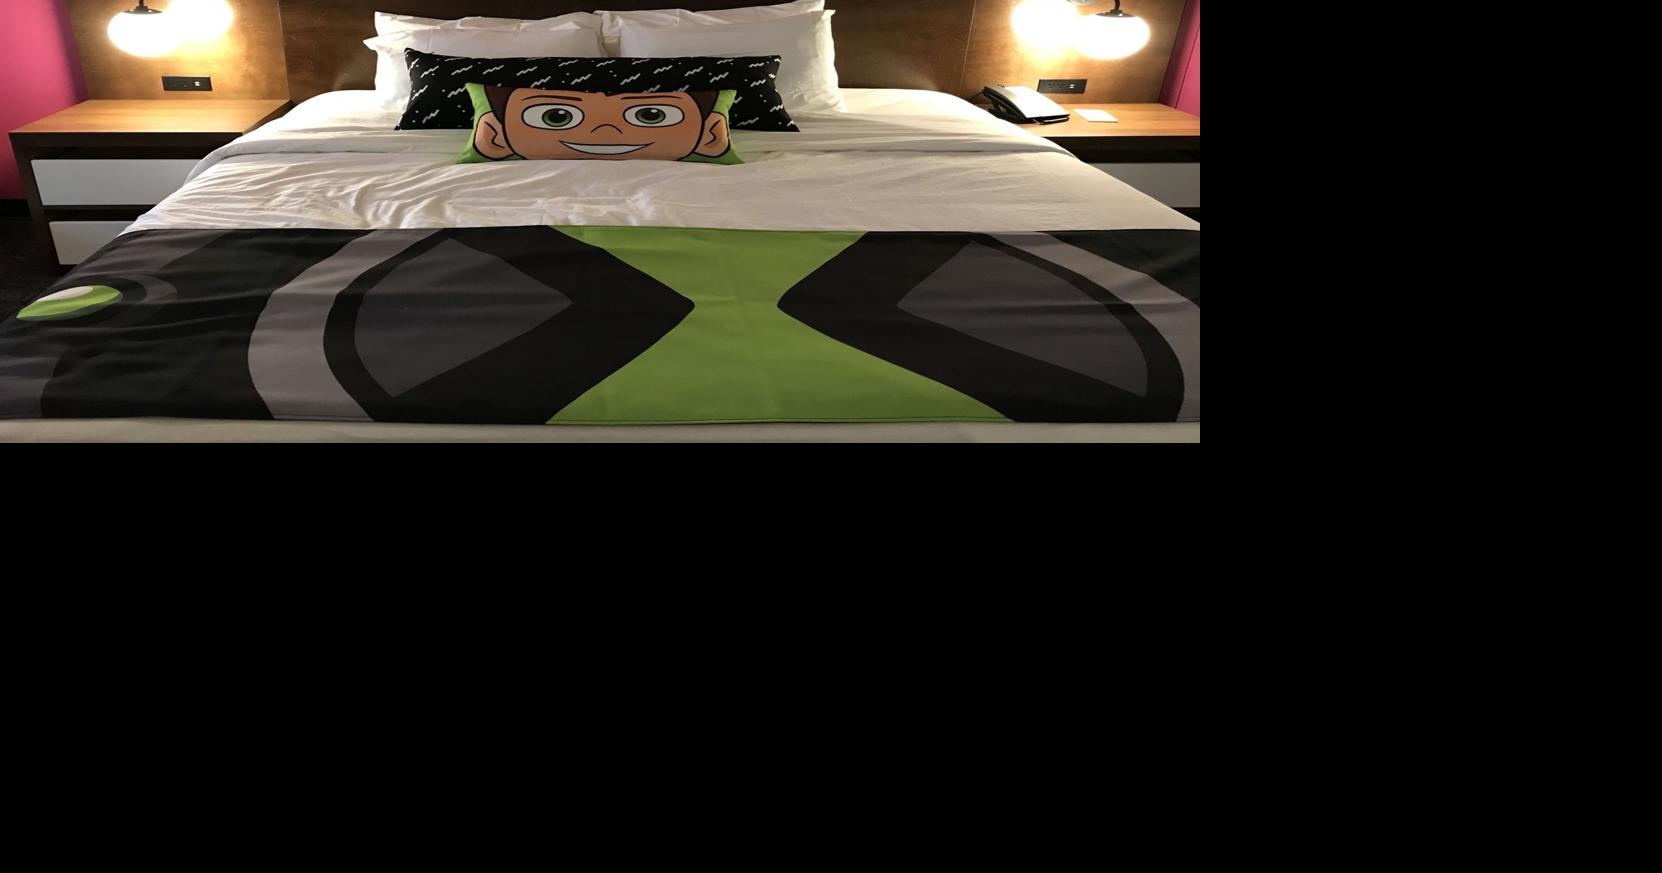 Cartoon Network to open animation-themed hotel in Lancaster